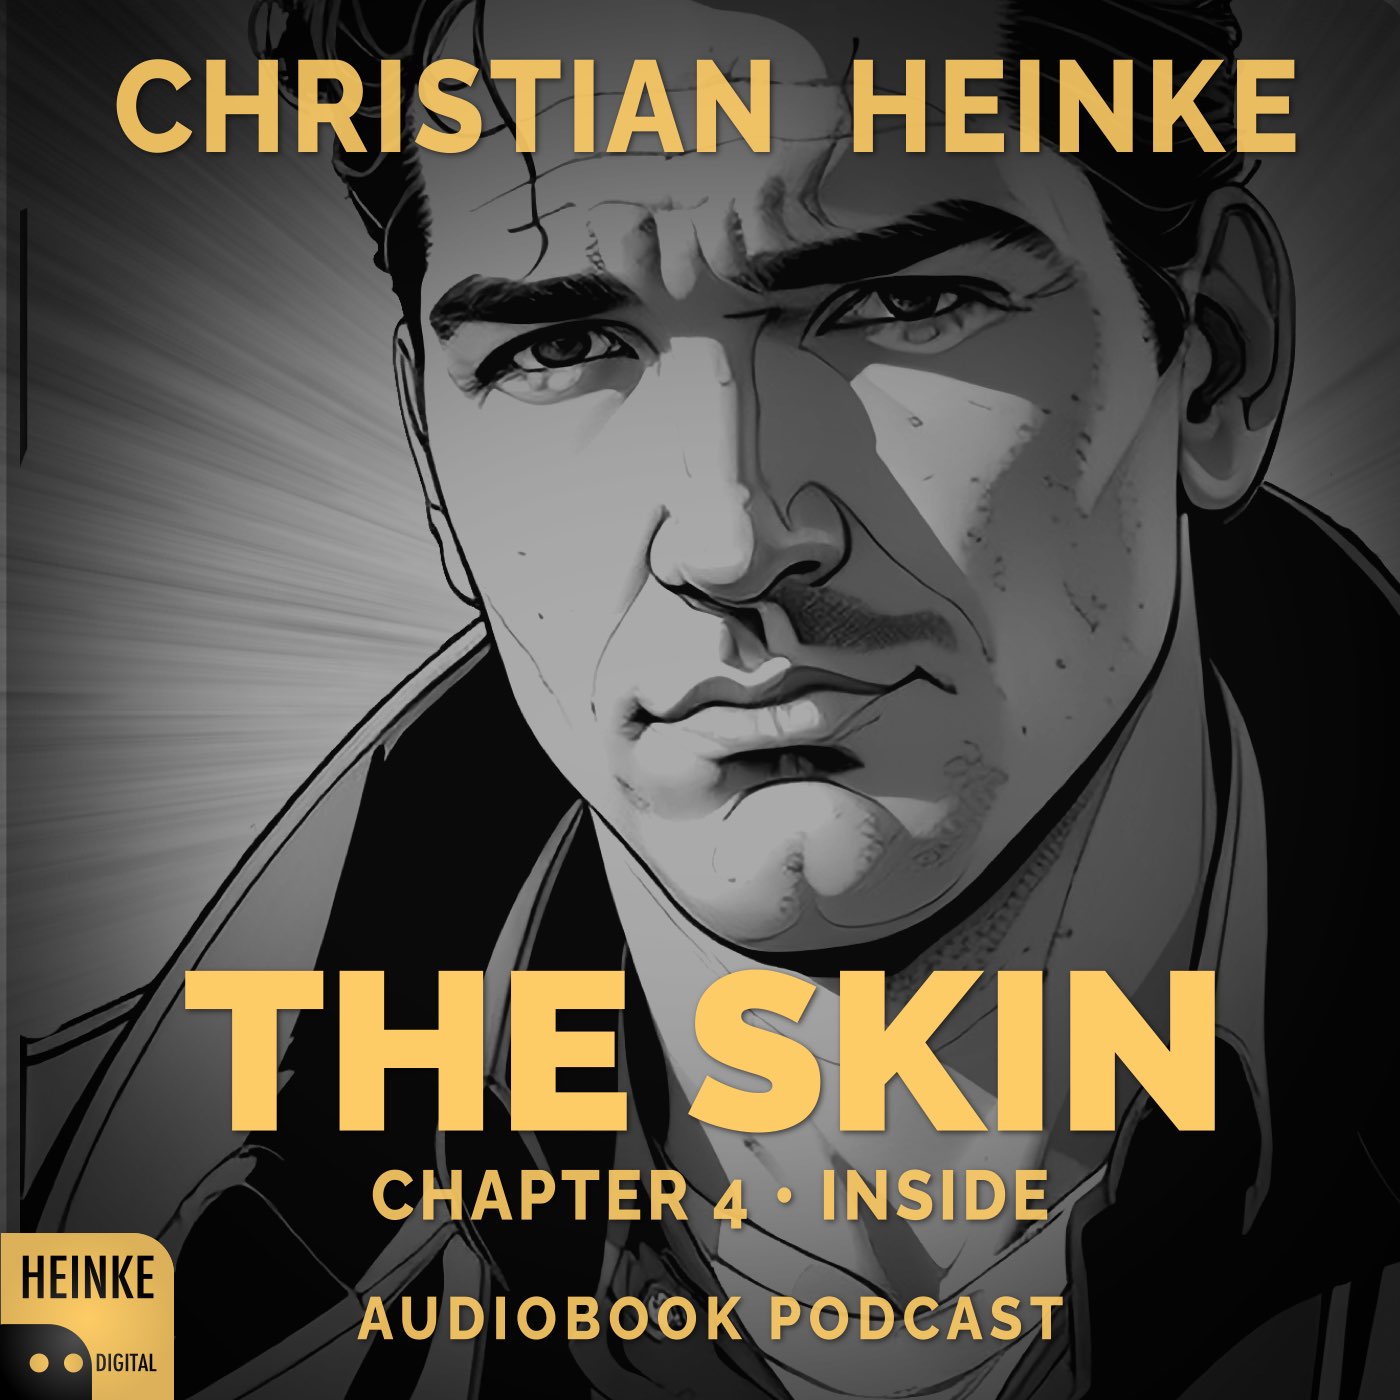 The Skin - Chapter 4 - Inside